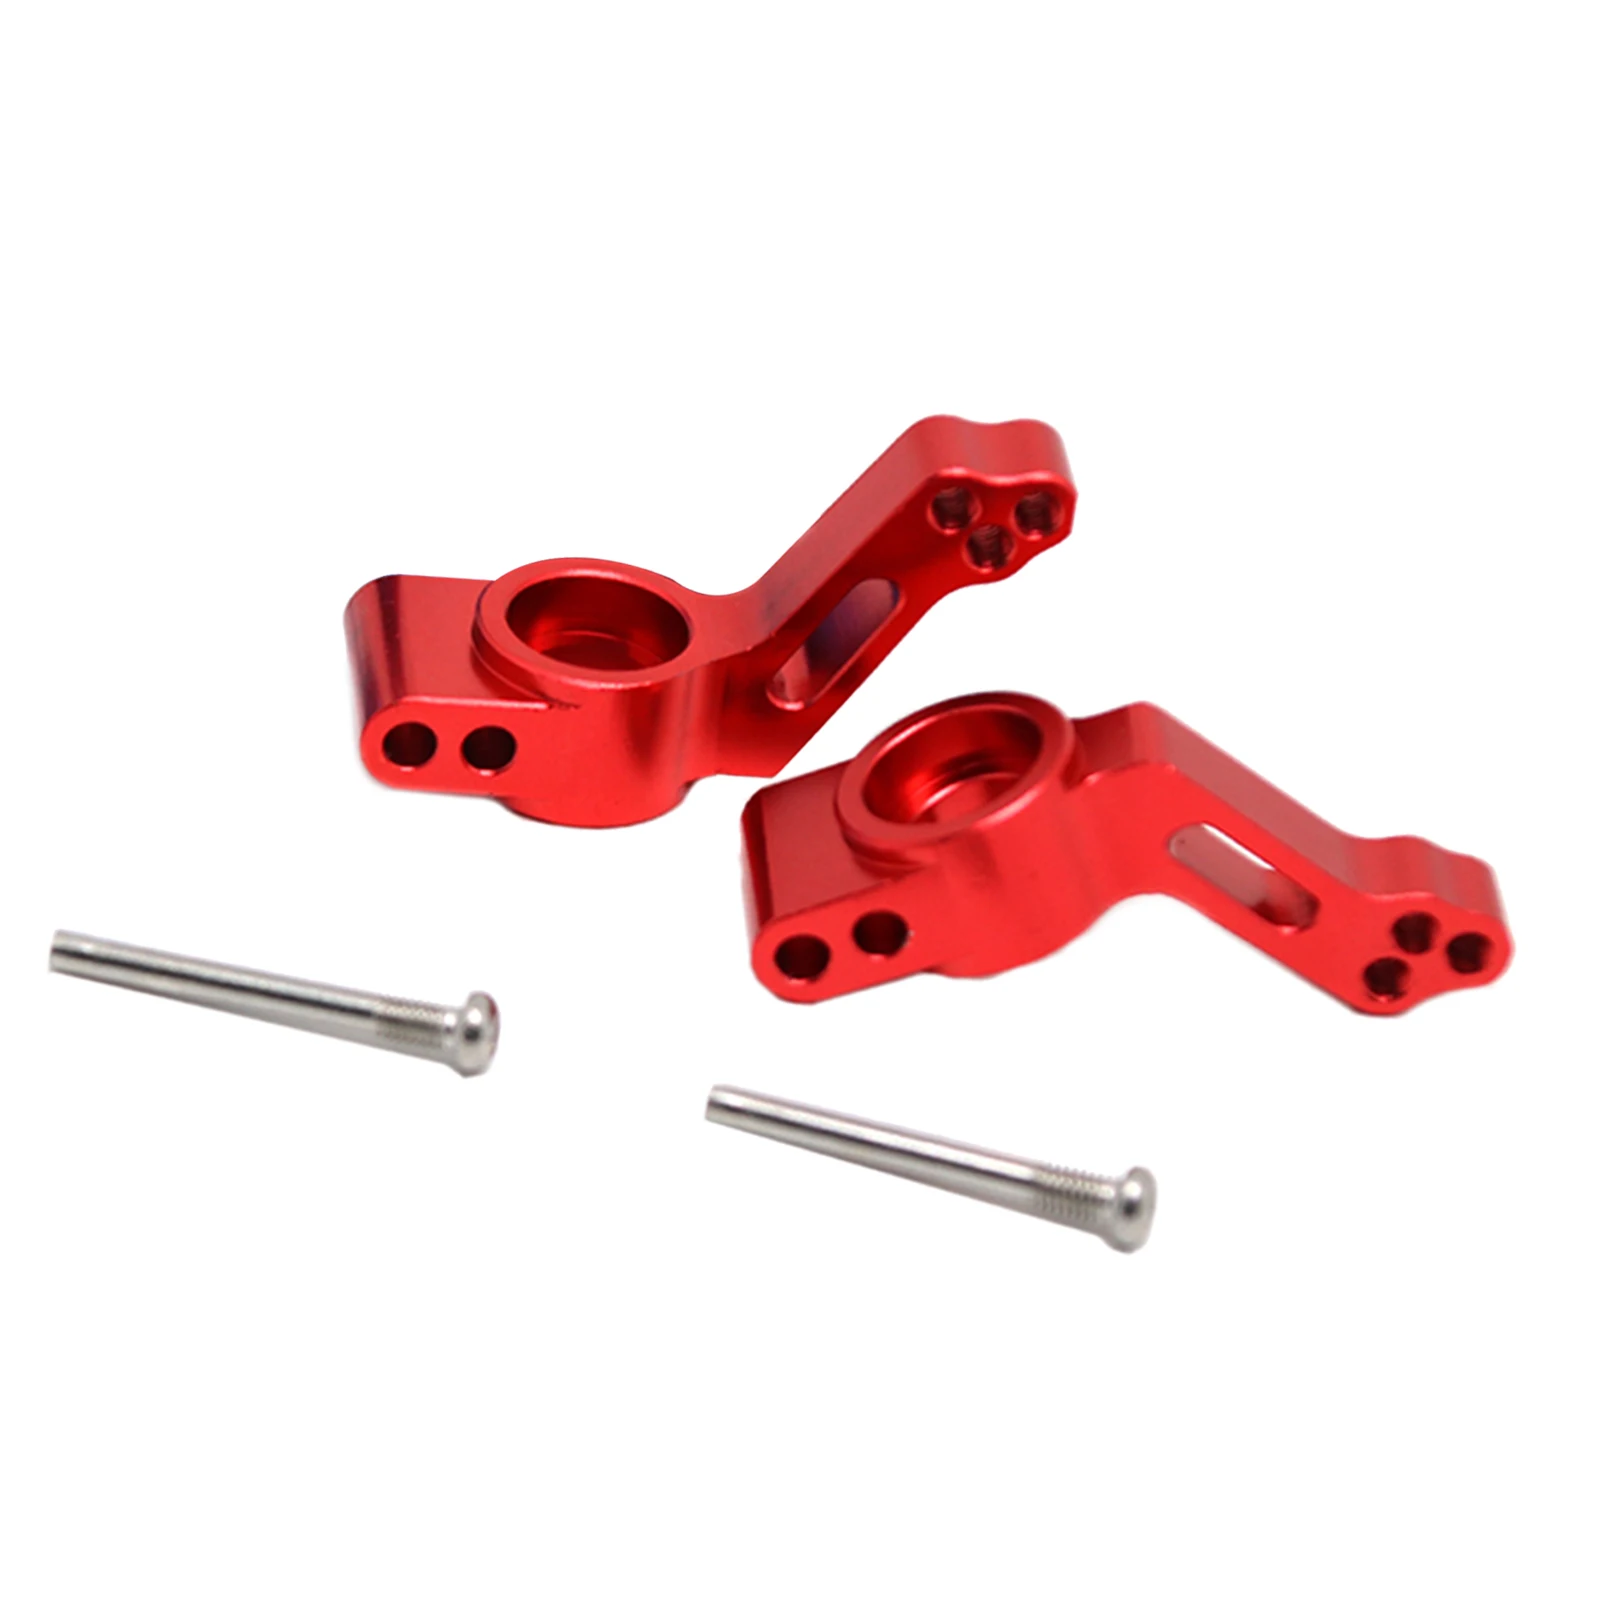 1 Pair Metal RC Steering Blocks for 1/10 RC Model Car Vehicle Modified Parts